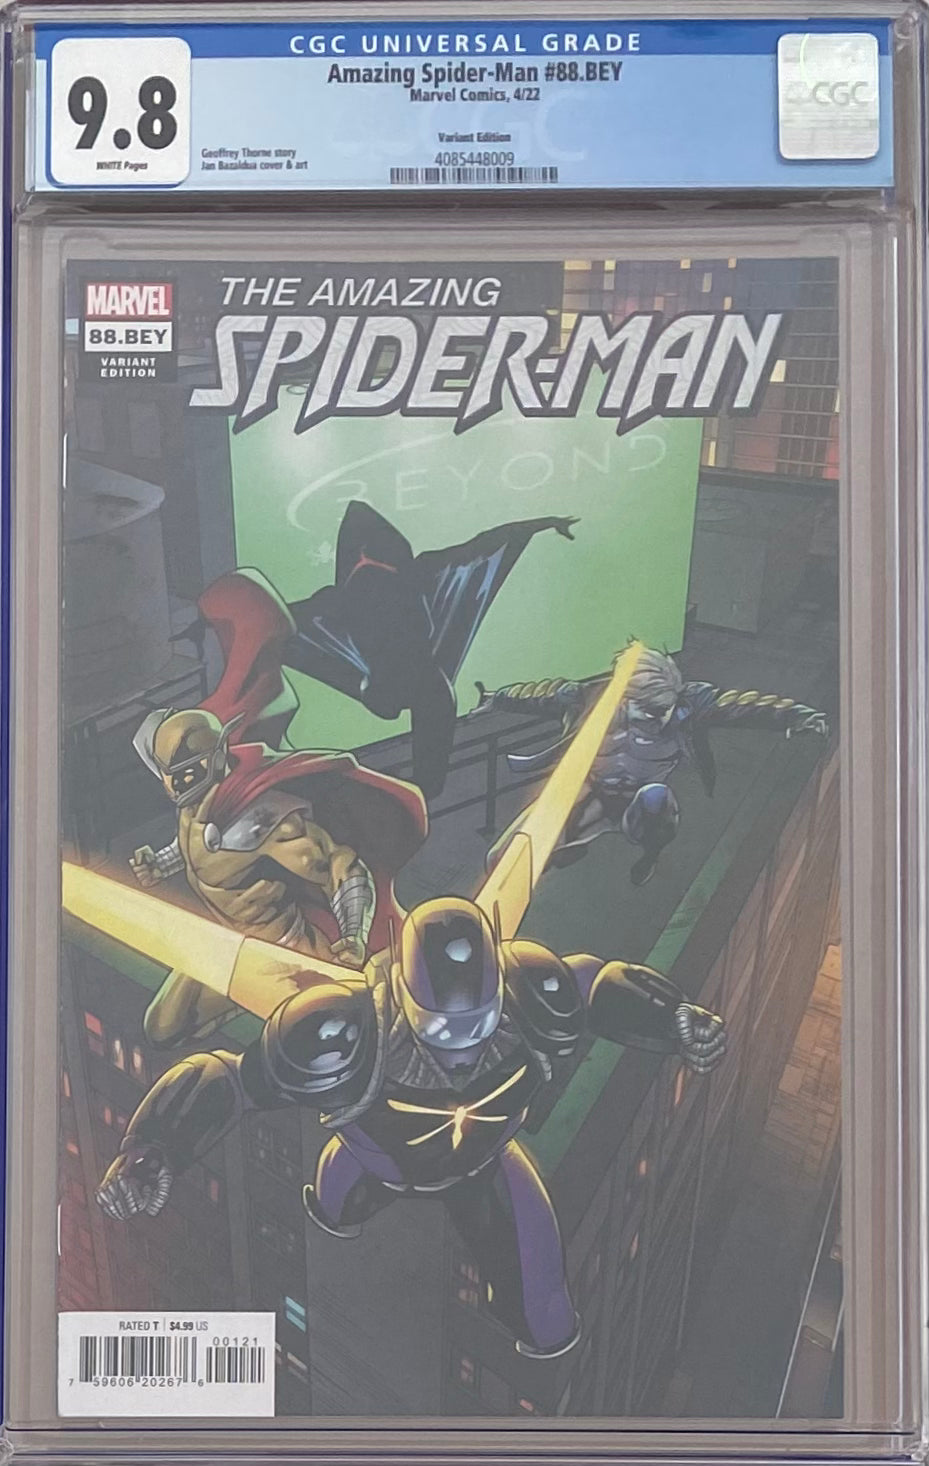 Amazing Spider-Man #88.BEY Variant CGC 9.8 - First Appearance Slingers